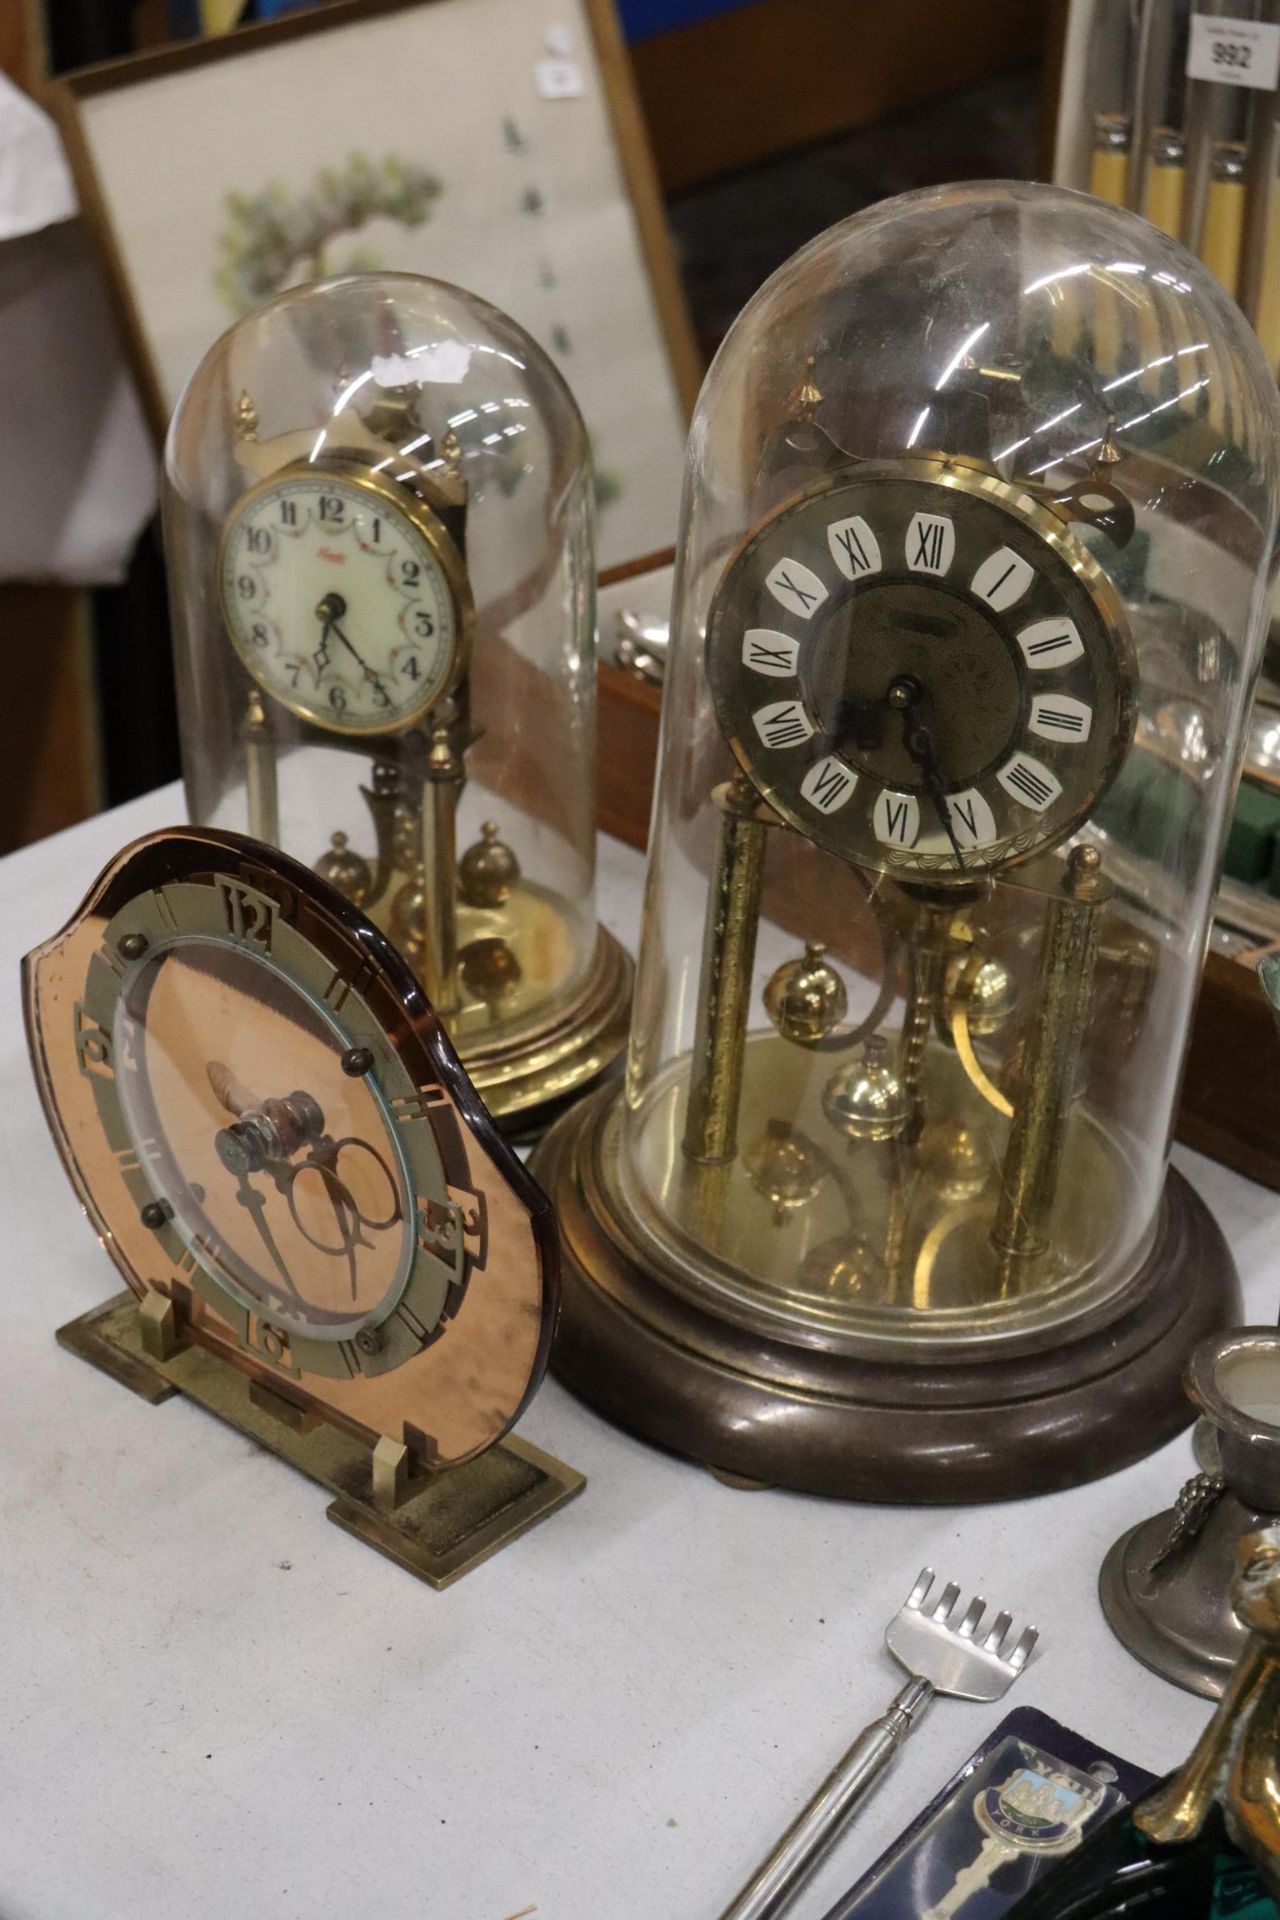 TWO VINTAGE ANNIVERSARY CLOCKS IN DOMES PLUS A MANTLE CLOCK - Image 5 of 12